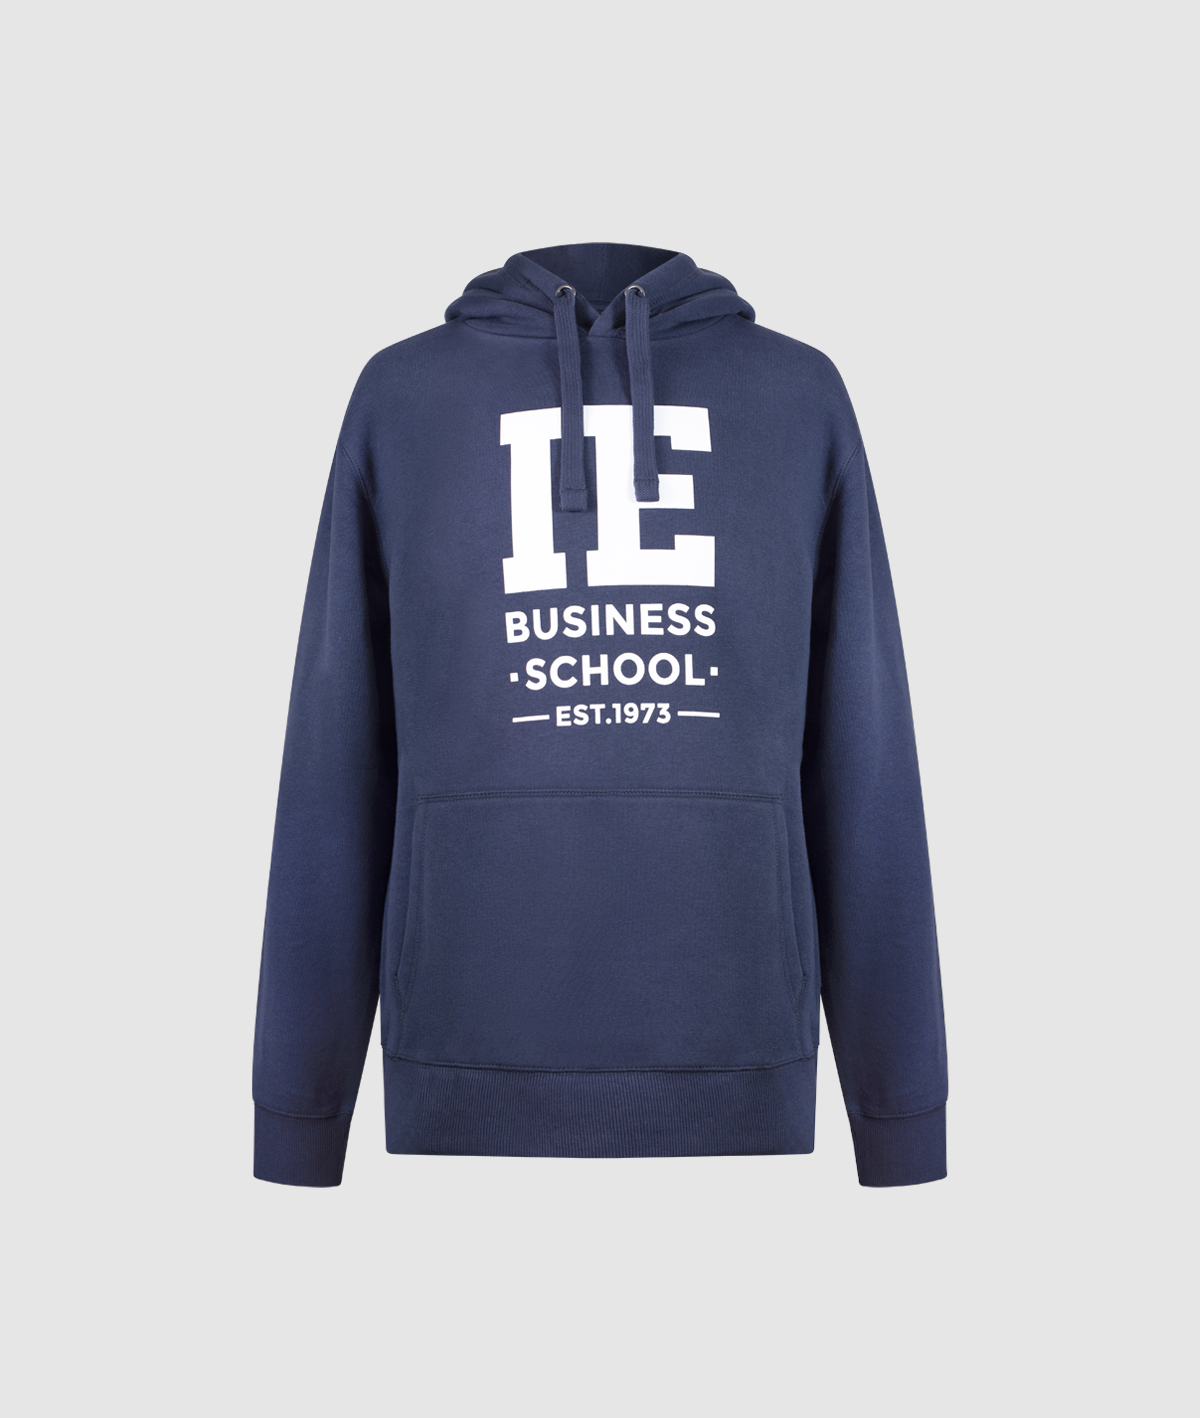 Spencer IEBS Hoodie. french navy colour front